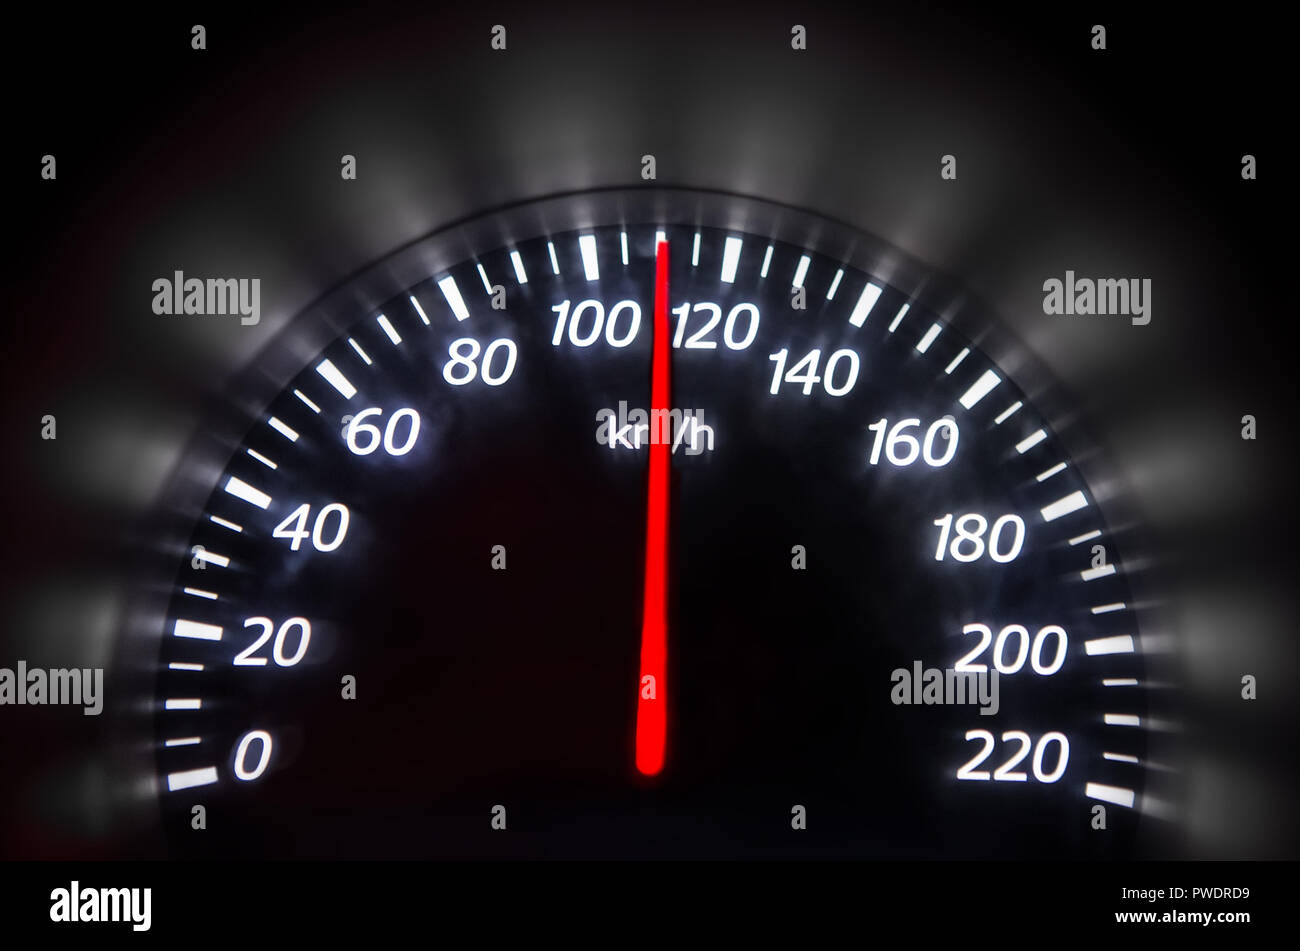 110 Kilometers per hour,light with car mileage with black background,number of speed,Odometer of car Stock Photo